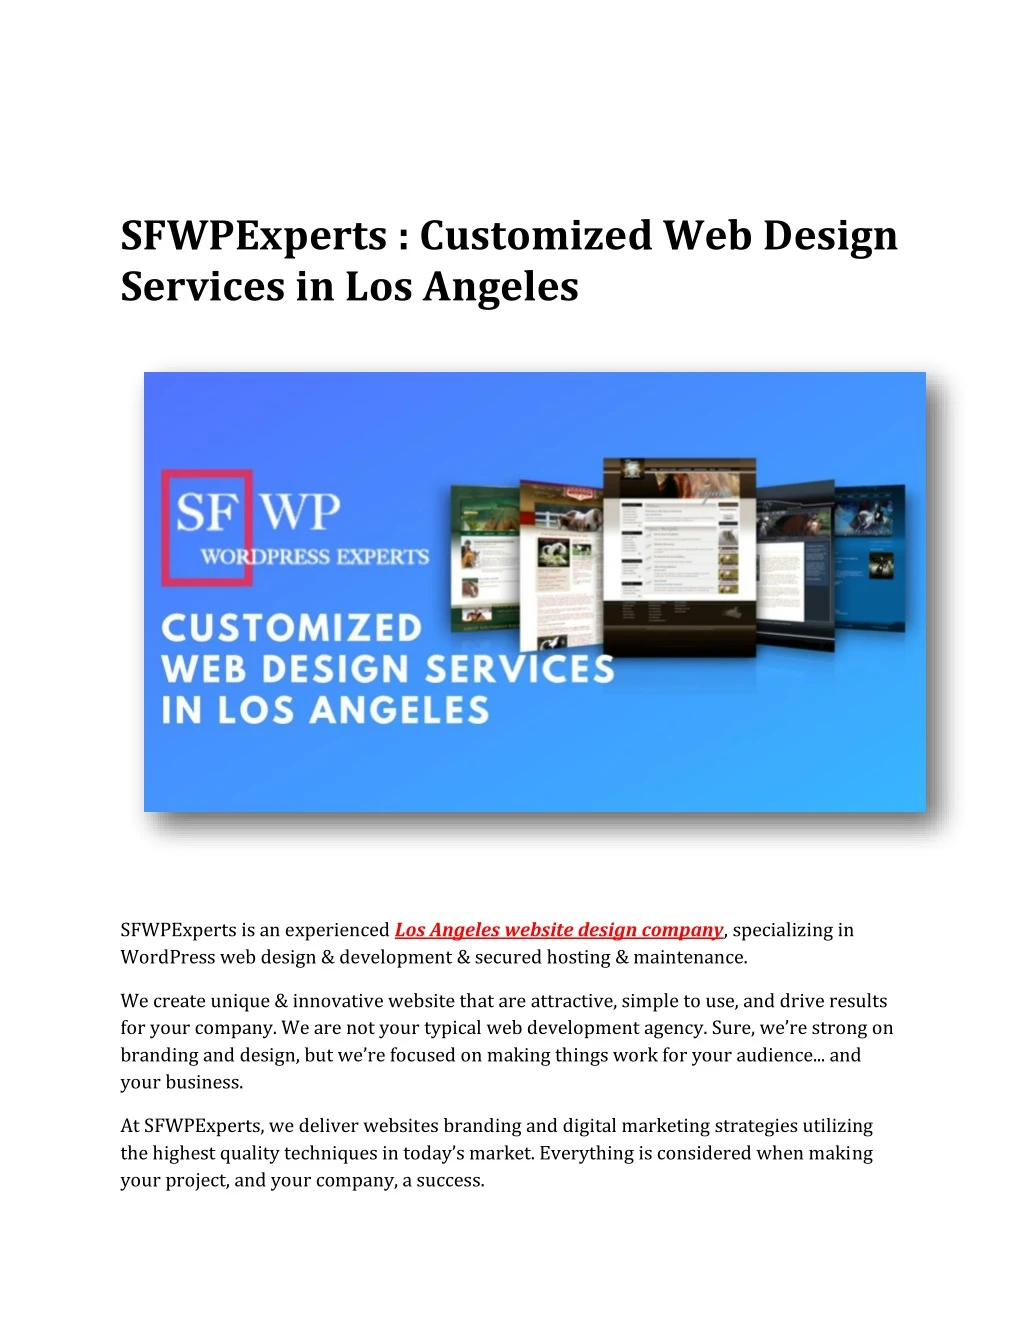 sfwpexperts customized web design services